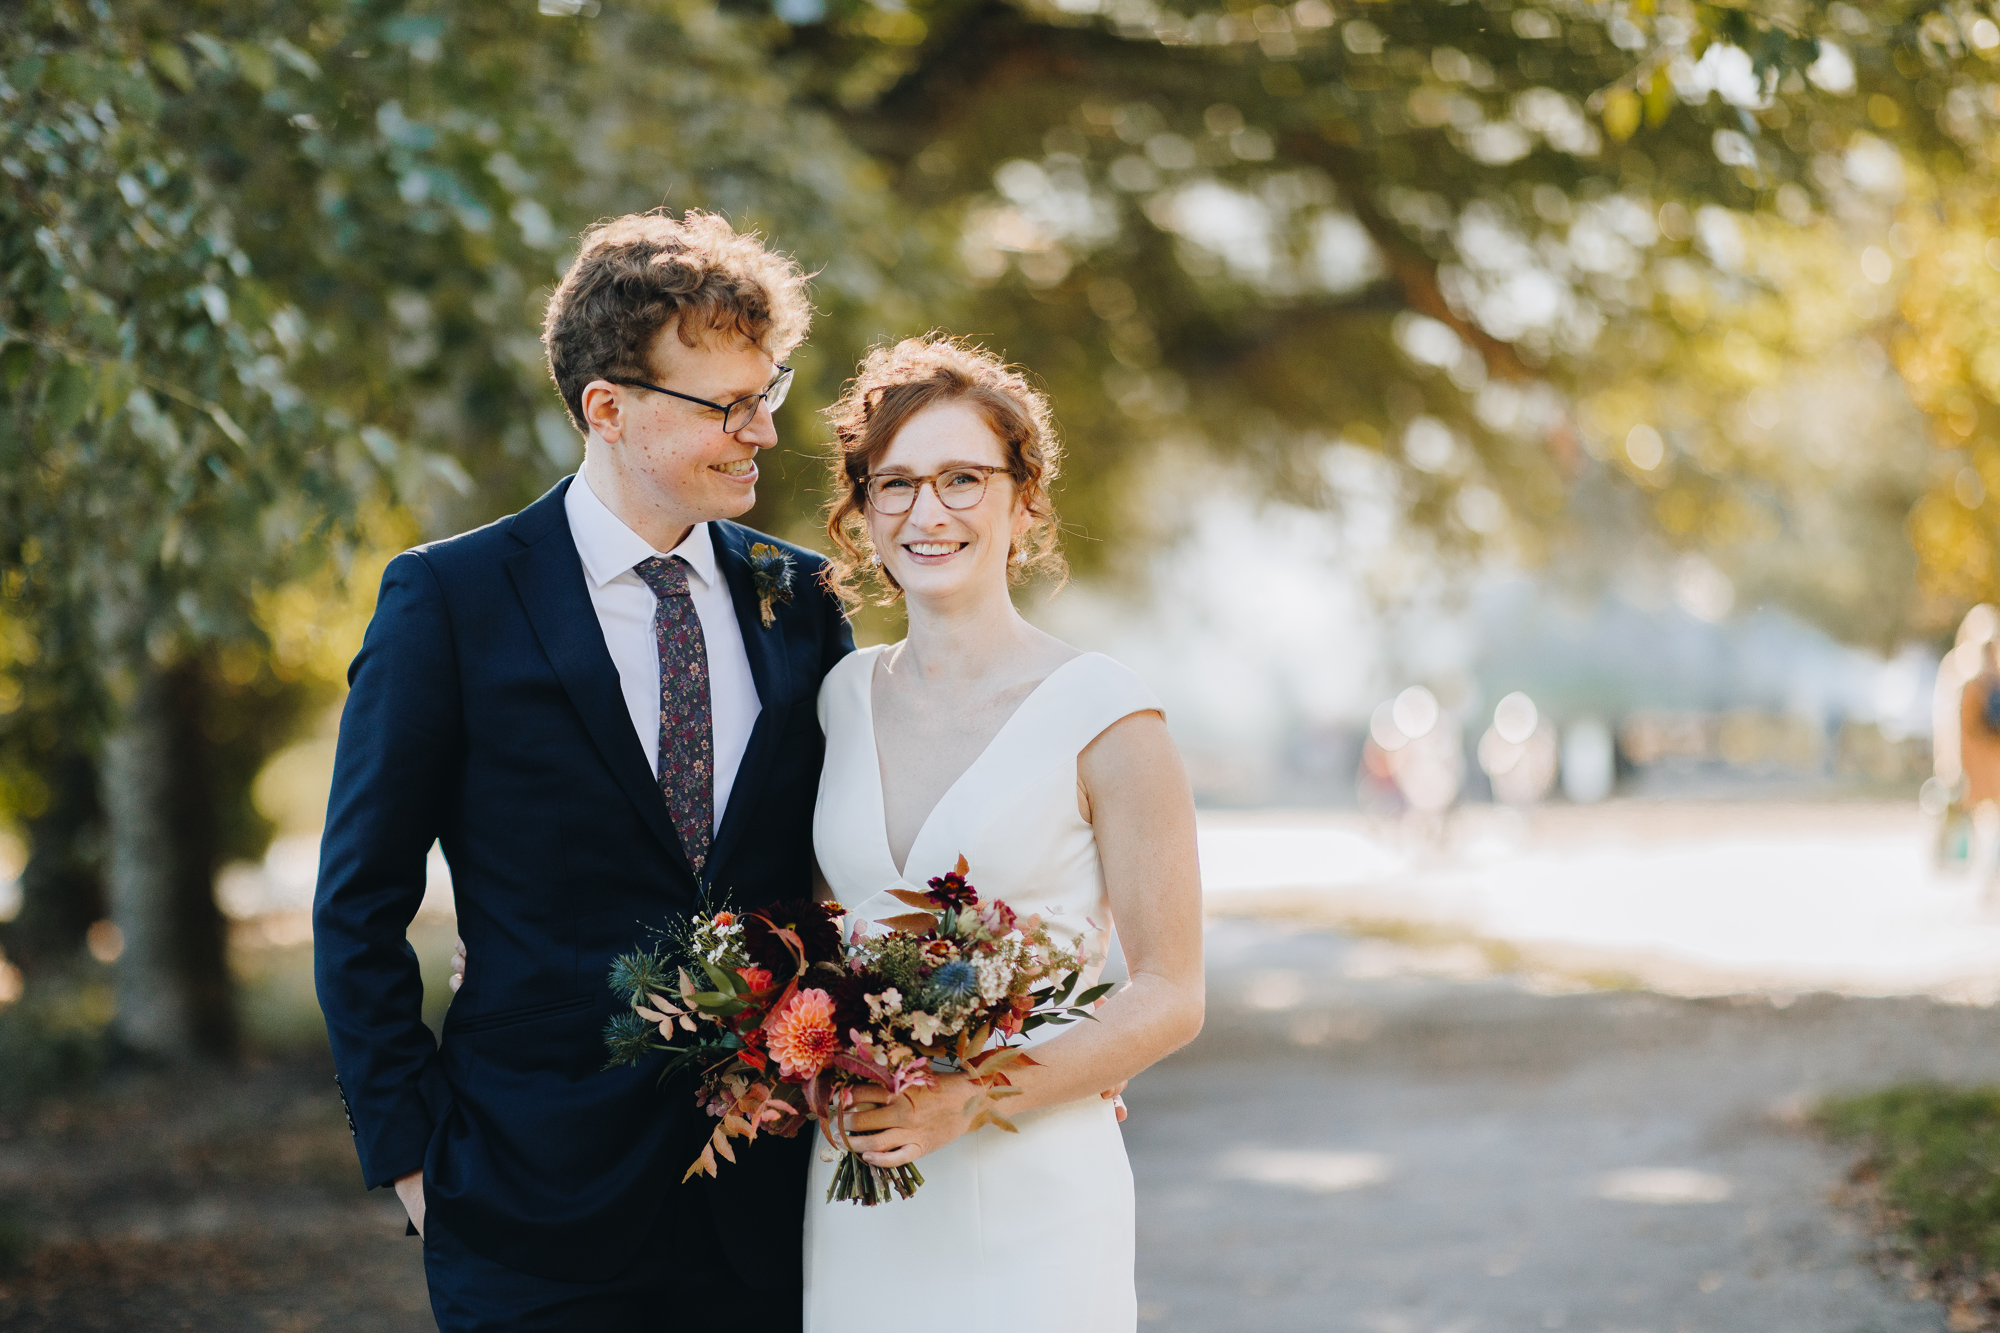 Fall wedding in Prospect Park with romantic golden hour light